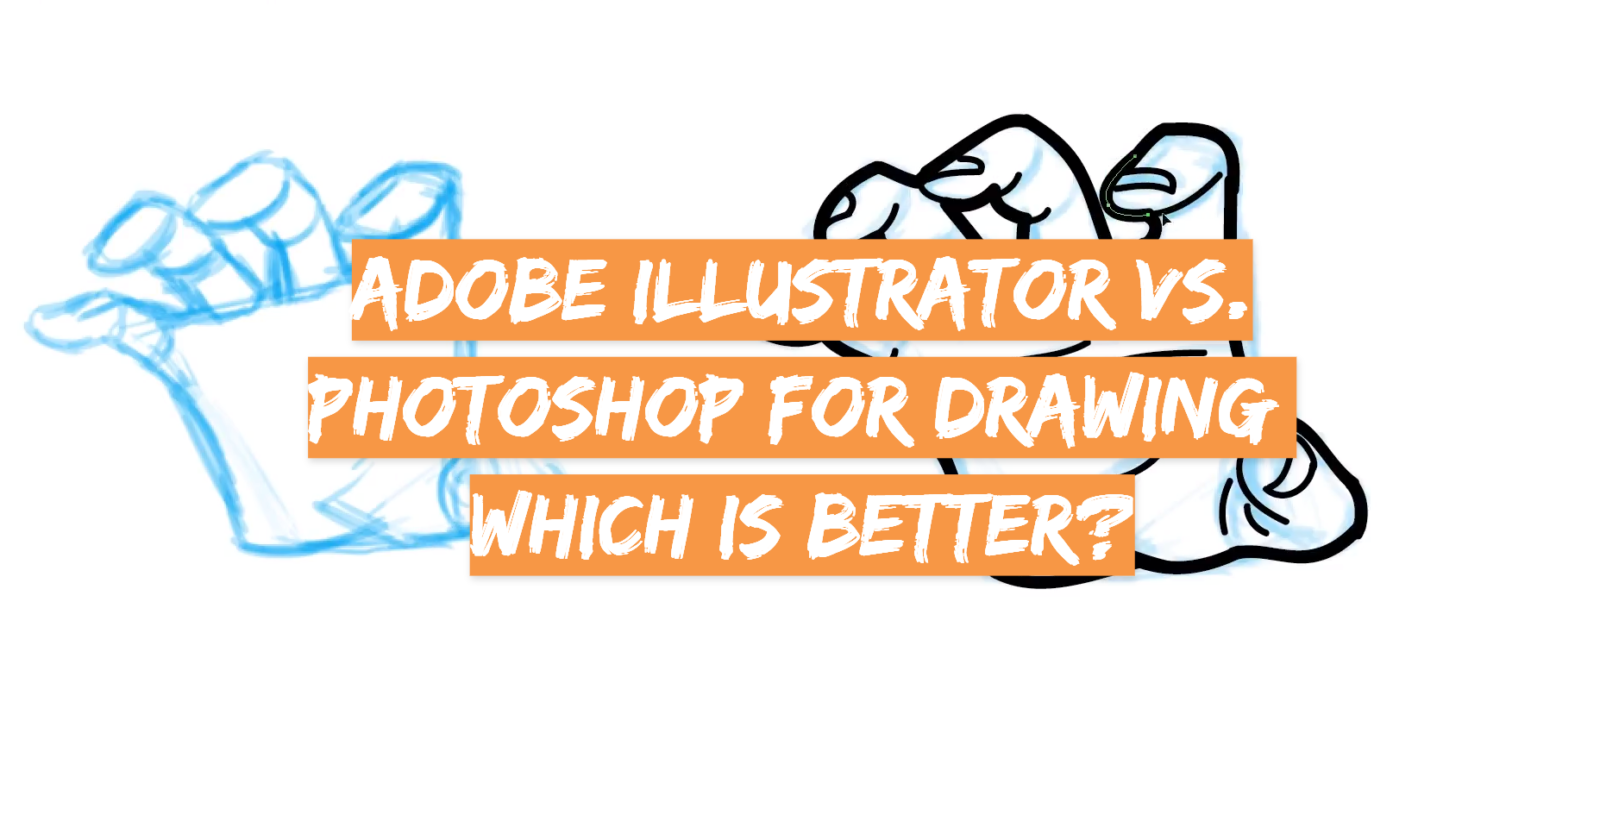 Adobe Illustrator vs. Photoshop for Drawing: Which is Better?